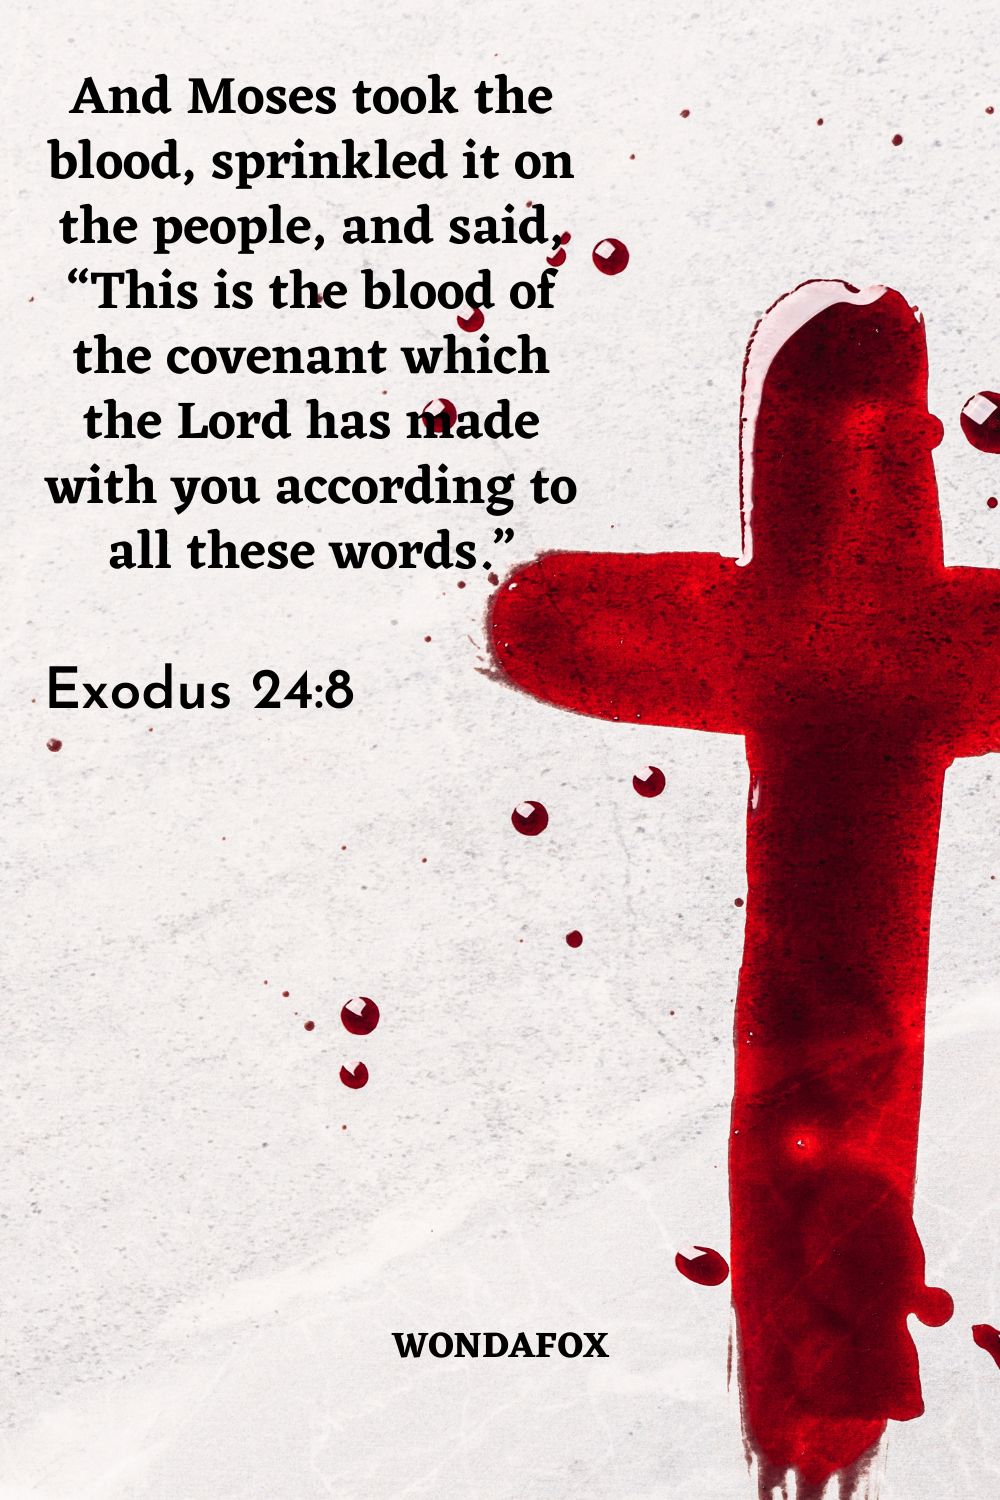 And Moses took the blood, sprinkled it on the people, and said, “This is the blood of the covenant which the Lord has made with you according to all these words.”
And Moses took the blood, sprinkled it on the people, and said, “This is the blood of the covenant which the Lord has made with you according to all these words.”
And Moses took the blood, sprinkled it on the people, and said, “This is the blood of the covenant which the Lord has made with you according to all these words.”
Exodus 24:8